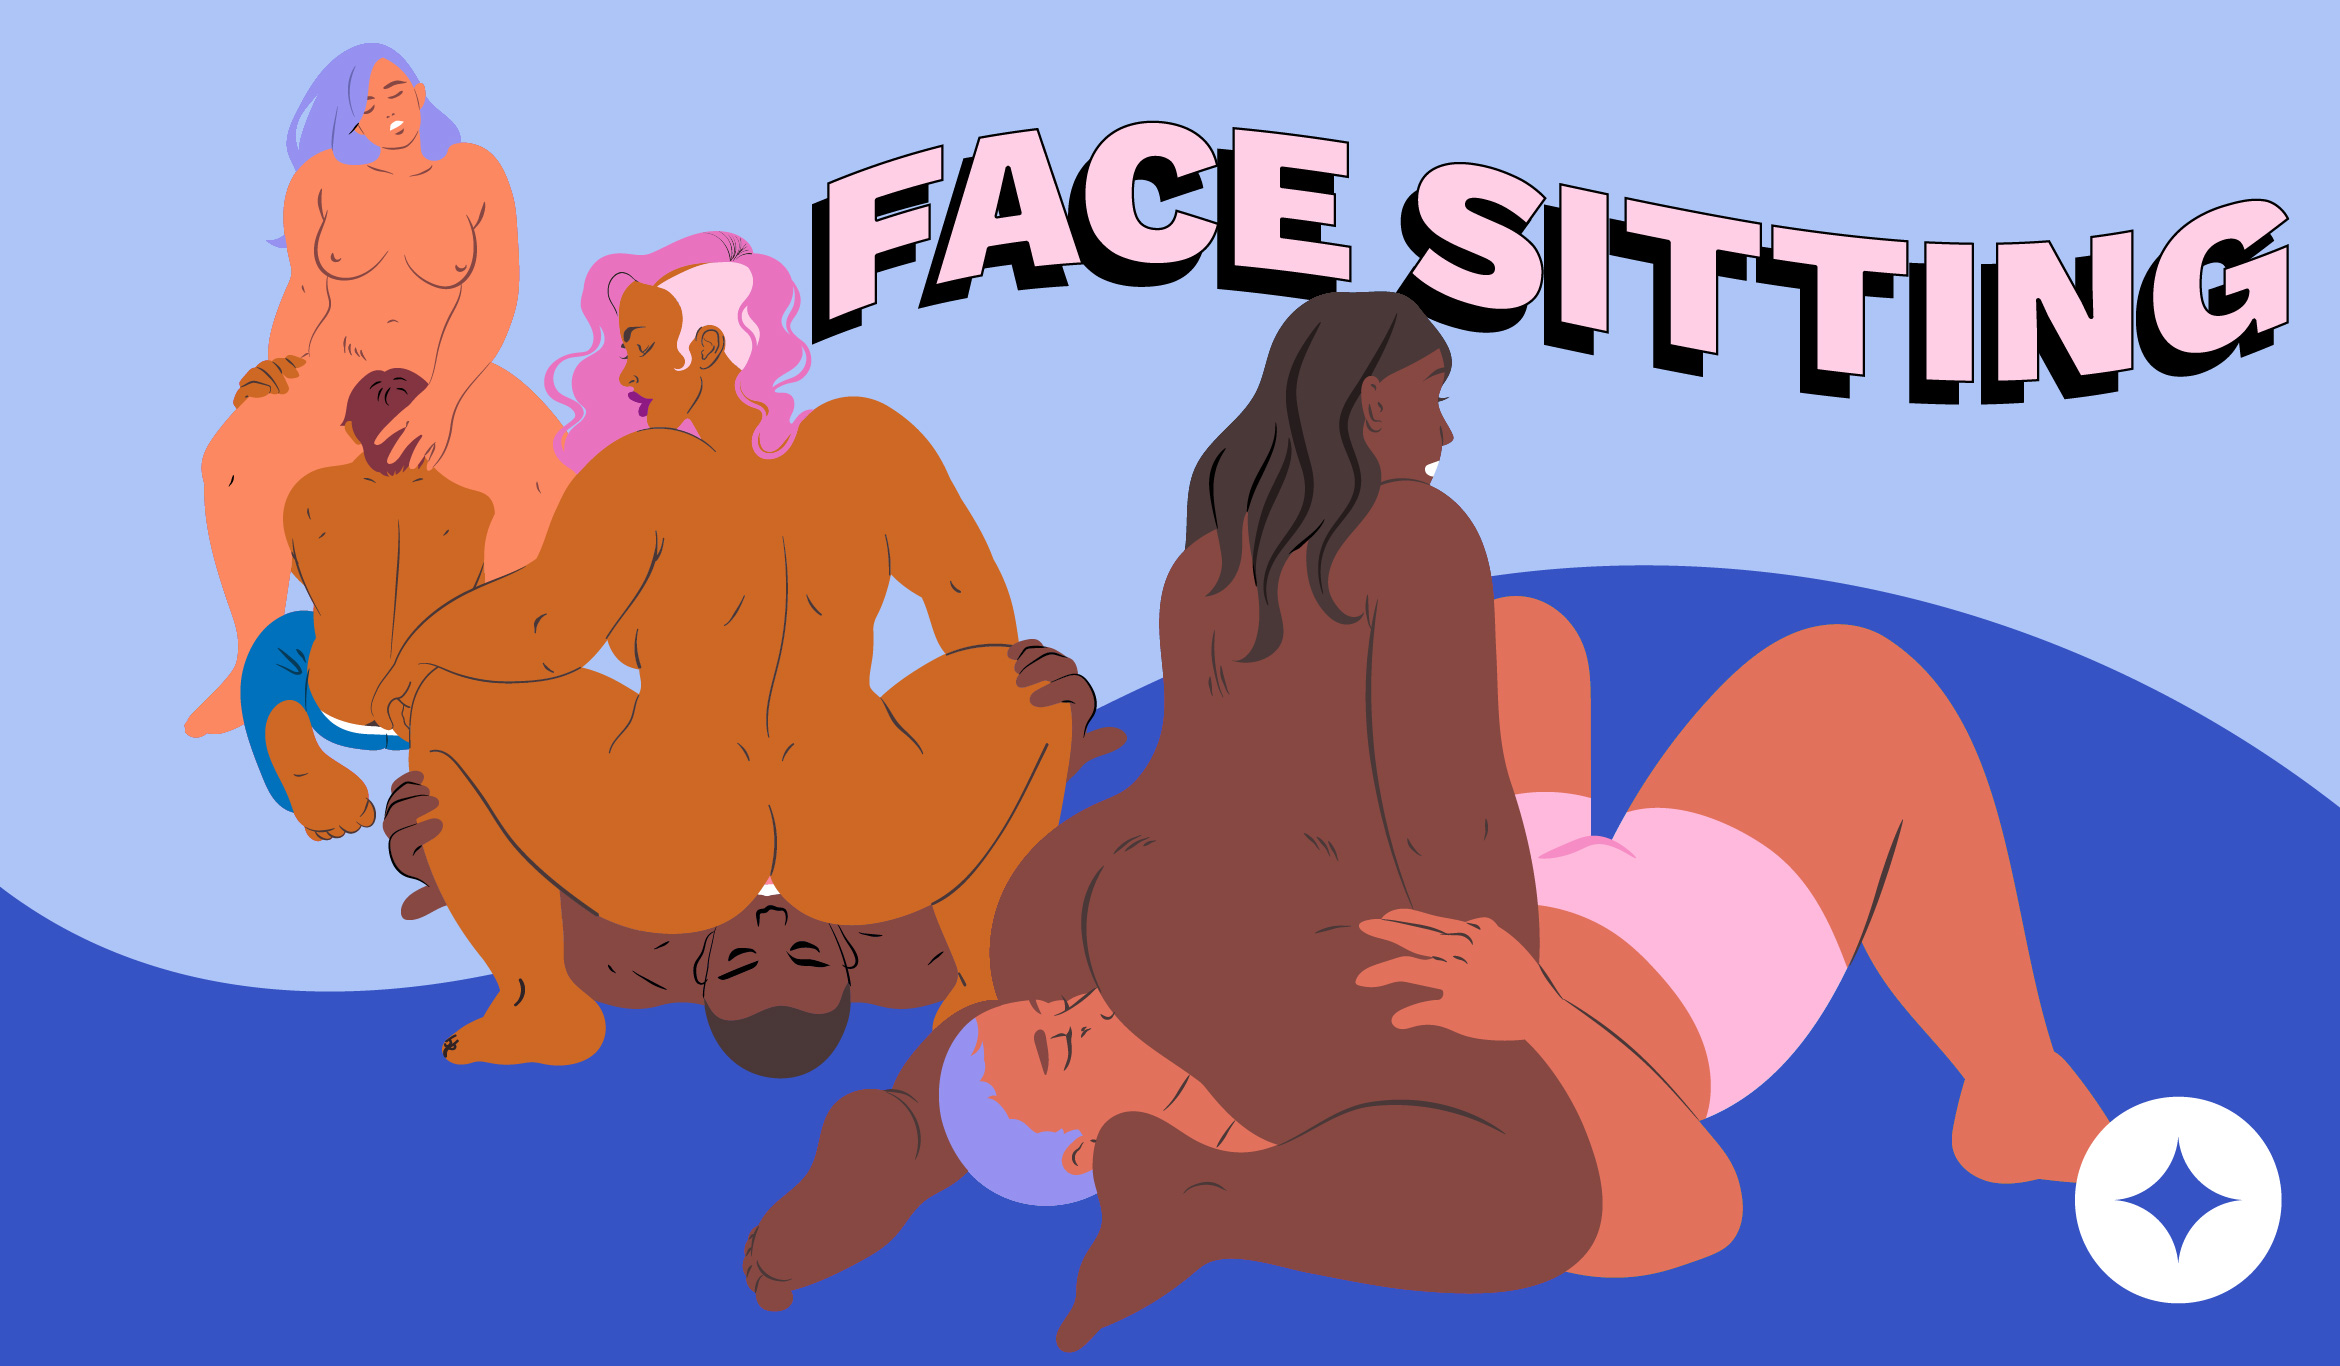 Face Sitting How to Facesitting Guide with Best Positions + Tips! pic pic